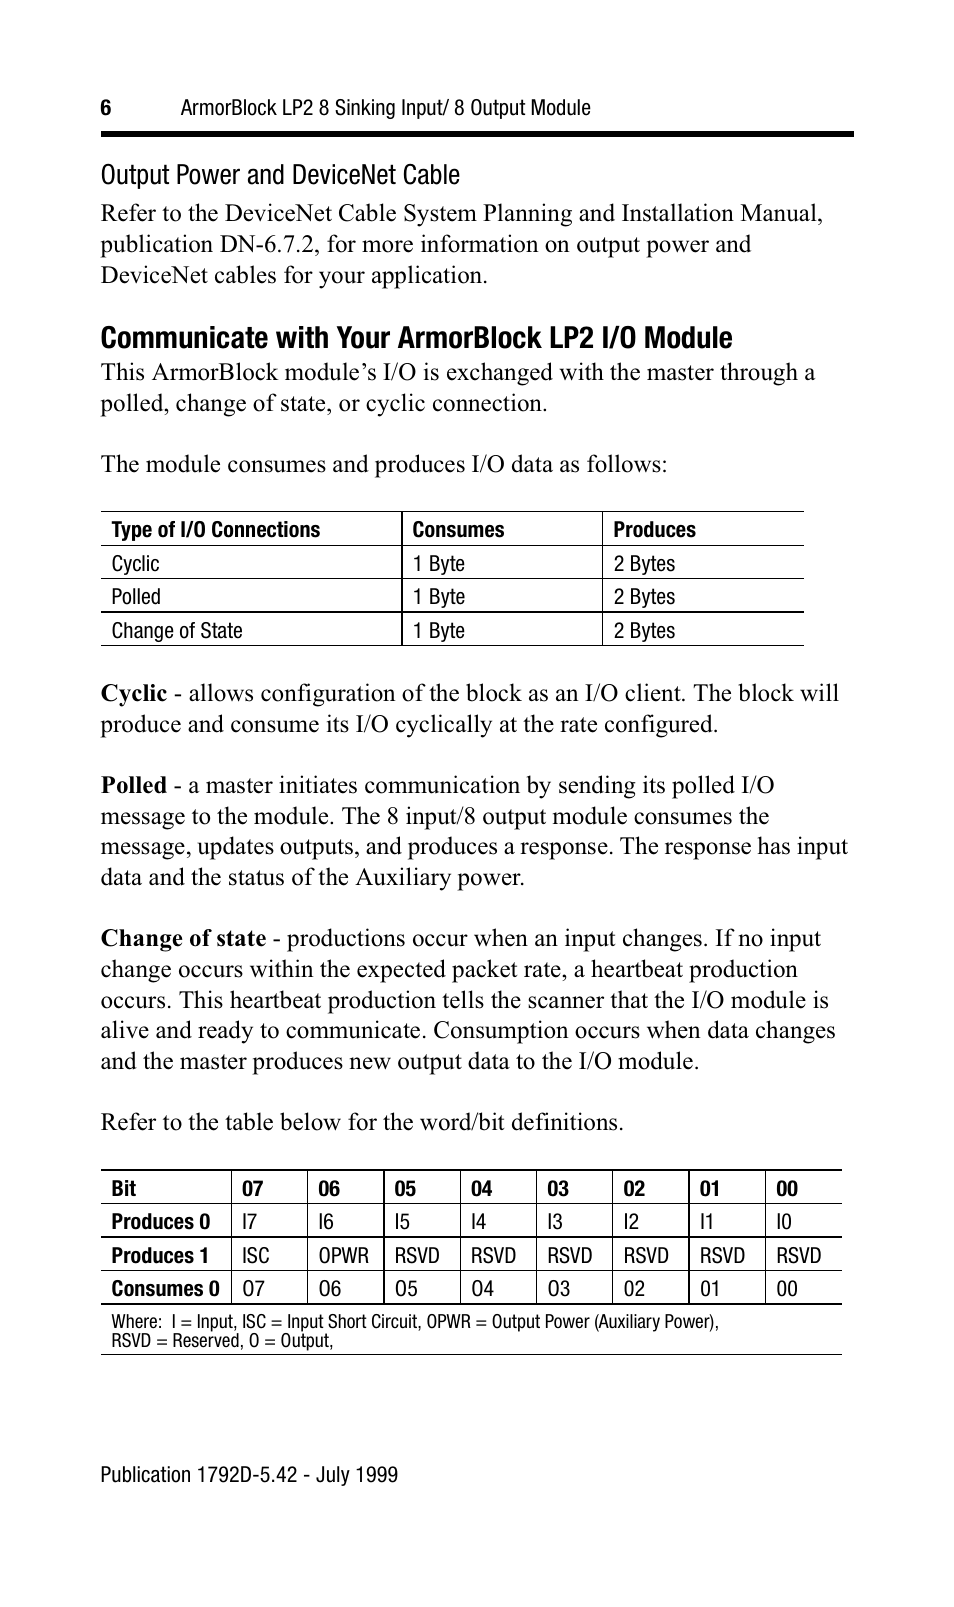 Communicate with your armorblock lp2 i/o module, Output power and devicenet cable | Rockwell Automation 1792D-8BT8LP ArmorBlock LP2 8 Sinking Input/8 Output Modul User Manual | Page 6 / 12